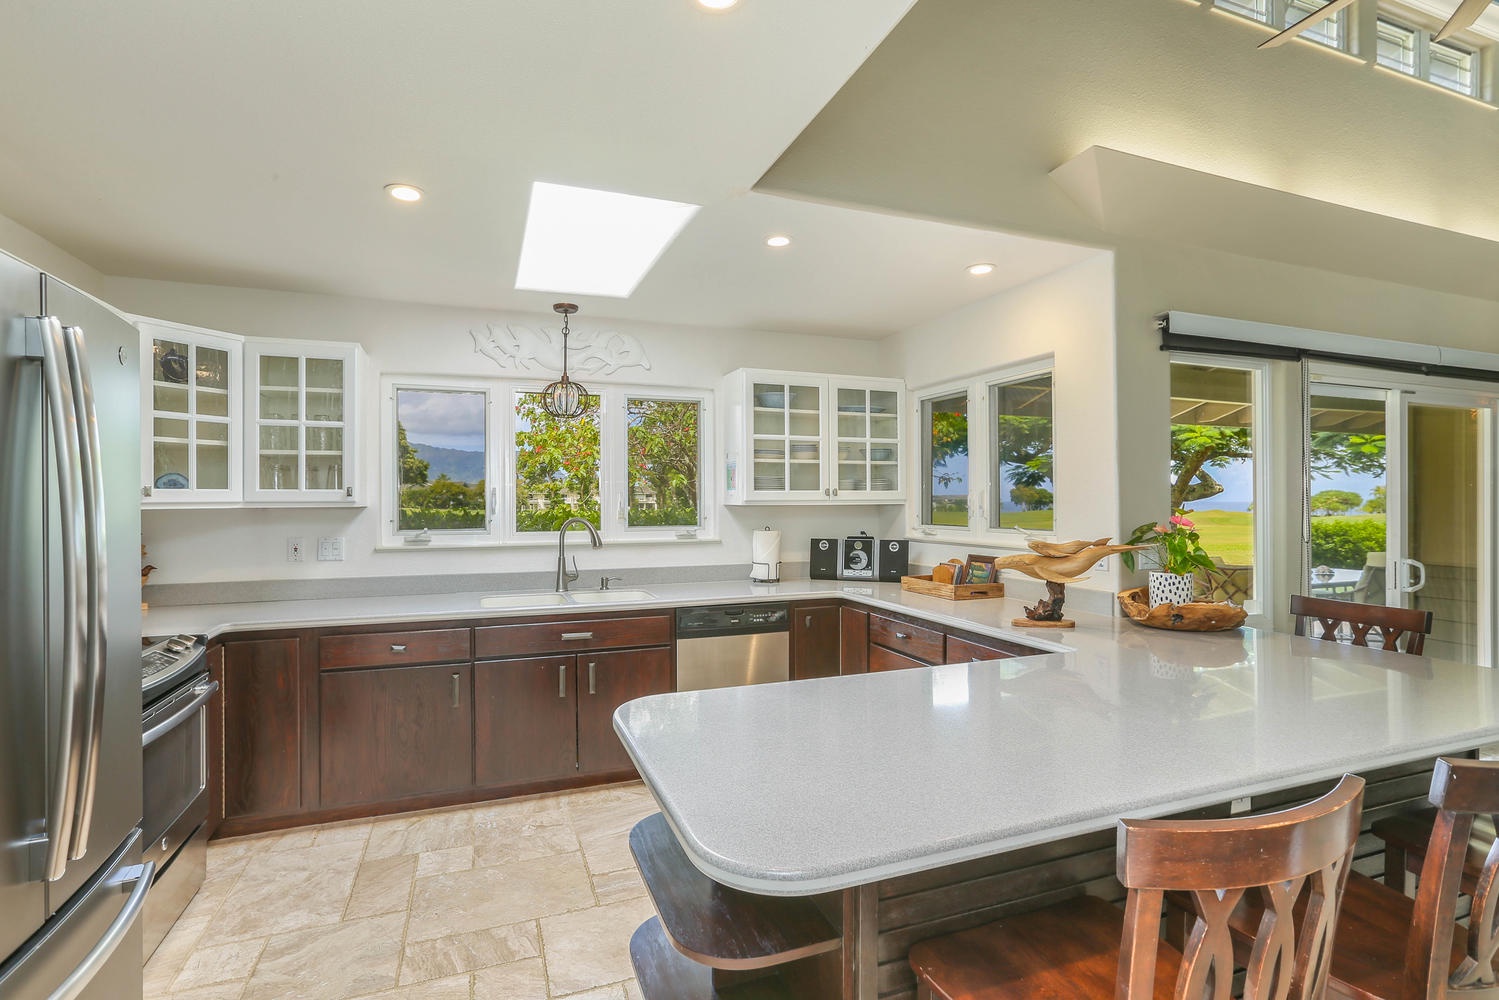 Princeville Vacation Rentals, Half Moon Hana - Lot's of counter space for the chef